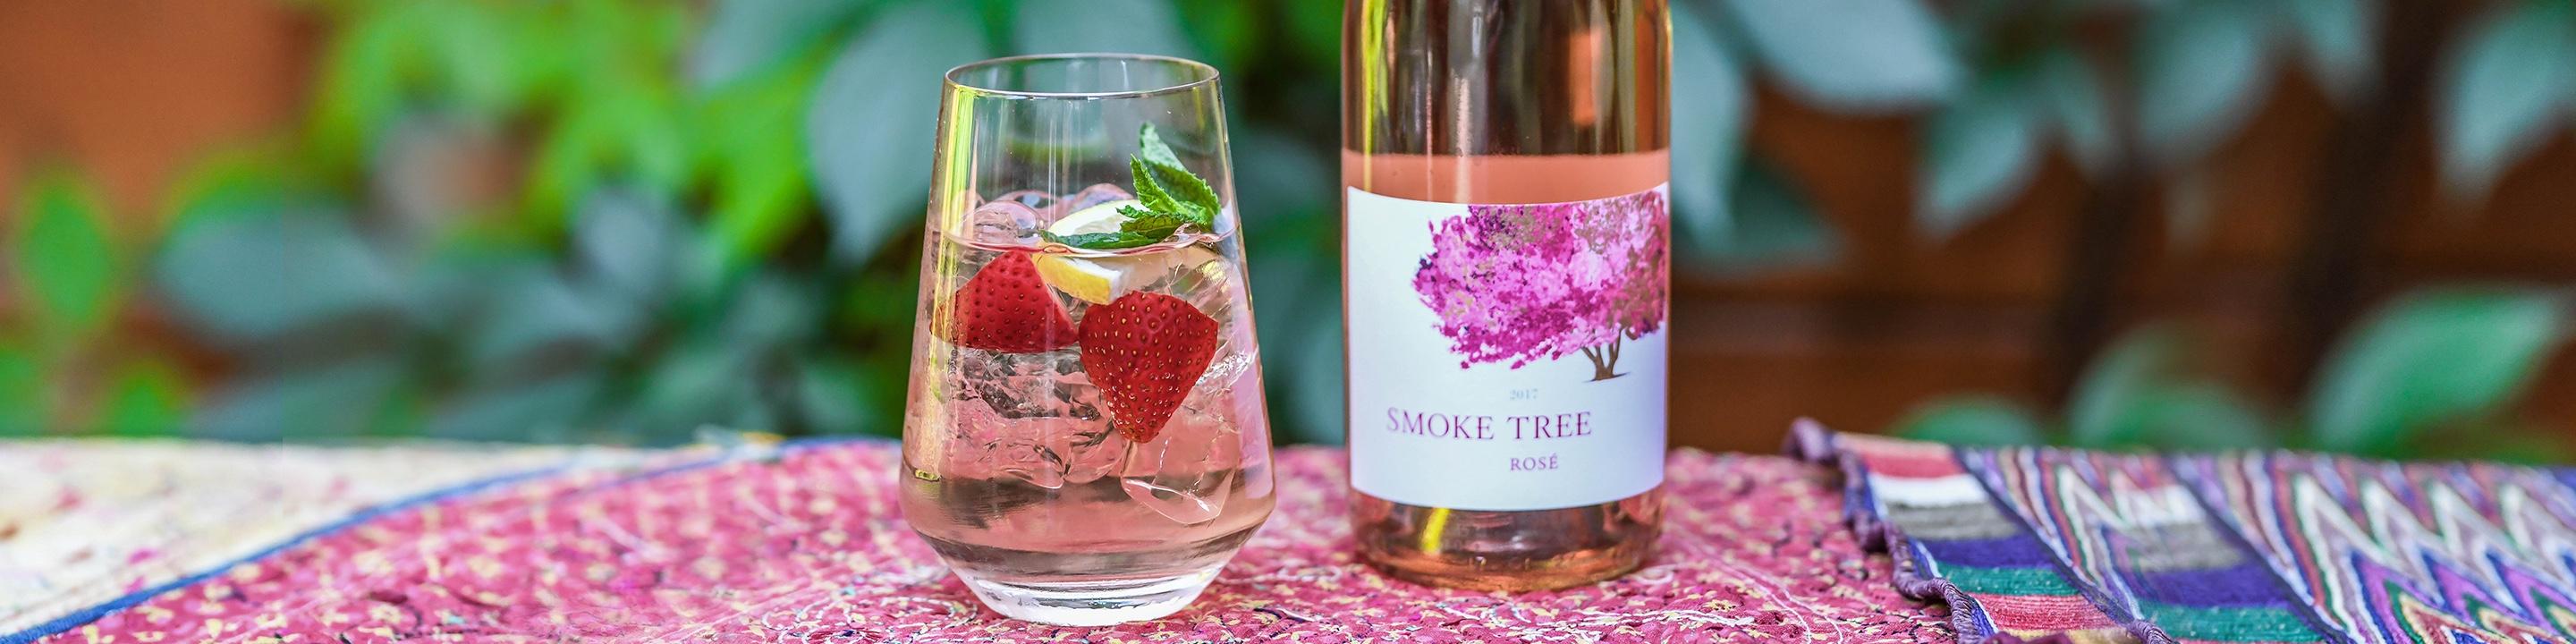 Smoke Tree was named after the American Smoke Tree, whose stunning  beauty requires little to no manipulation. Winemaker, Anne Dempsey builds upon the Smoke Tree tradition of  minimalist, natural winemaking to honor the delicacy and purity of the fruit.